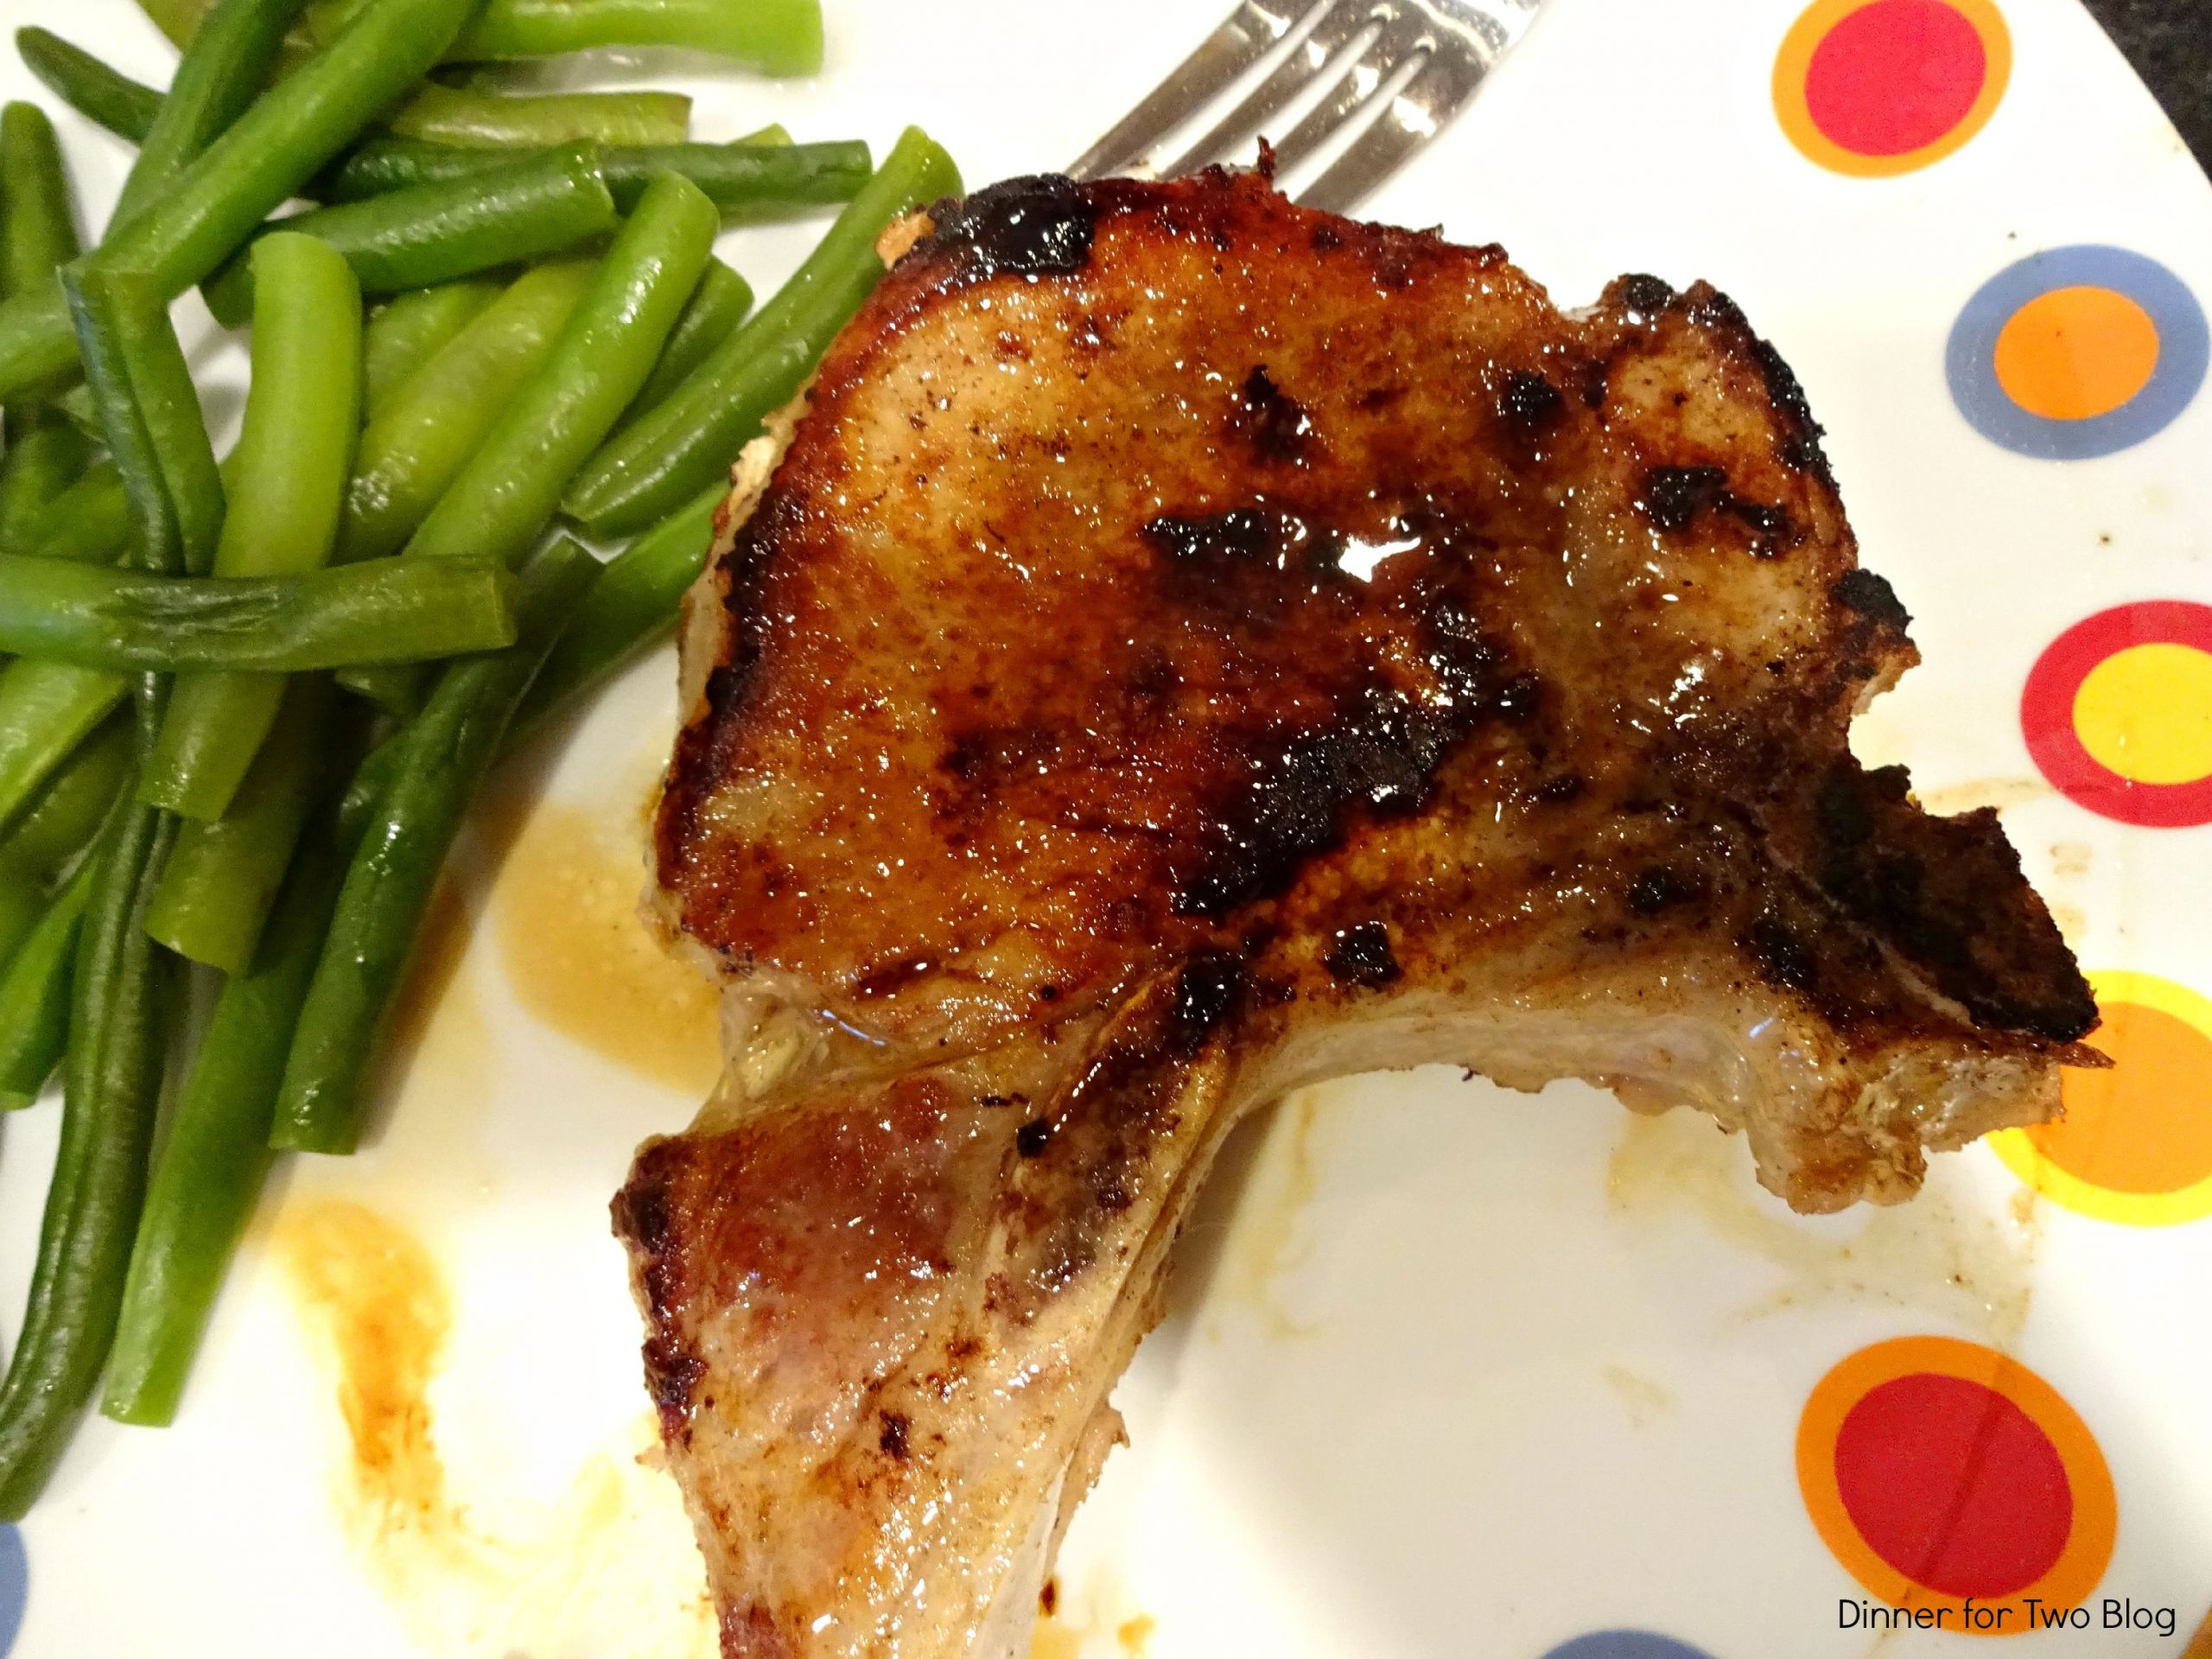 Pork Chop Dinners For Two
 Brined Pork Chops